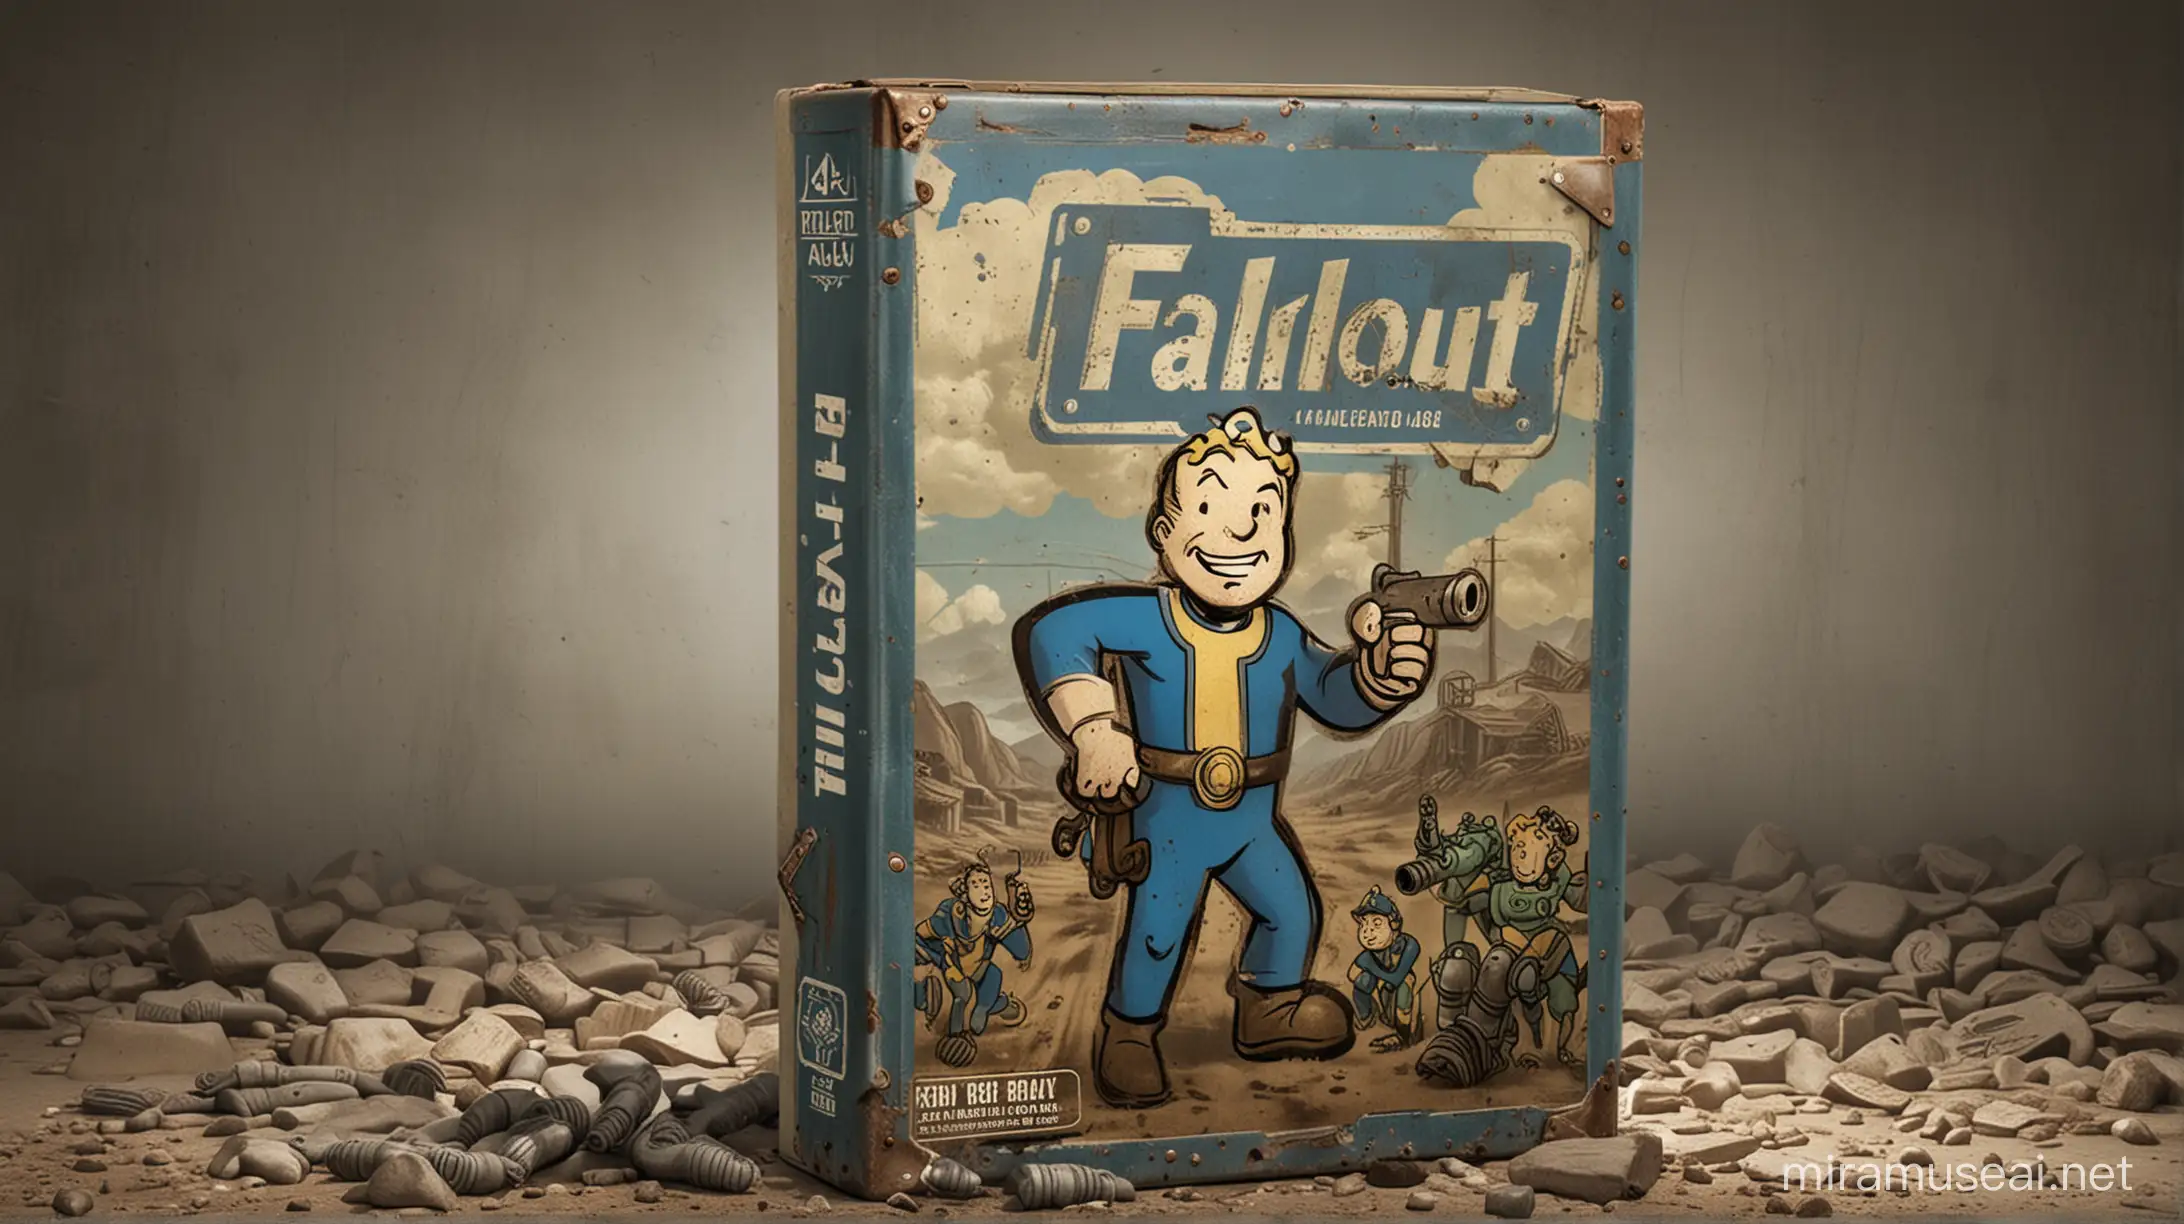 Radiant Vault Boy Concept Art for Fallout Video Game Cover